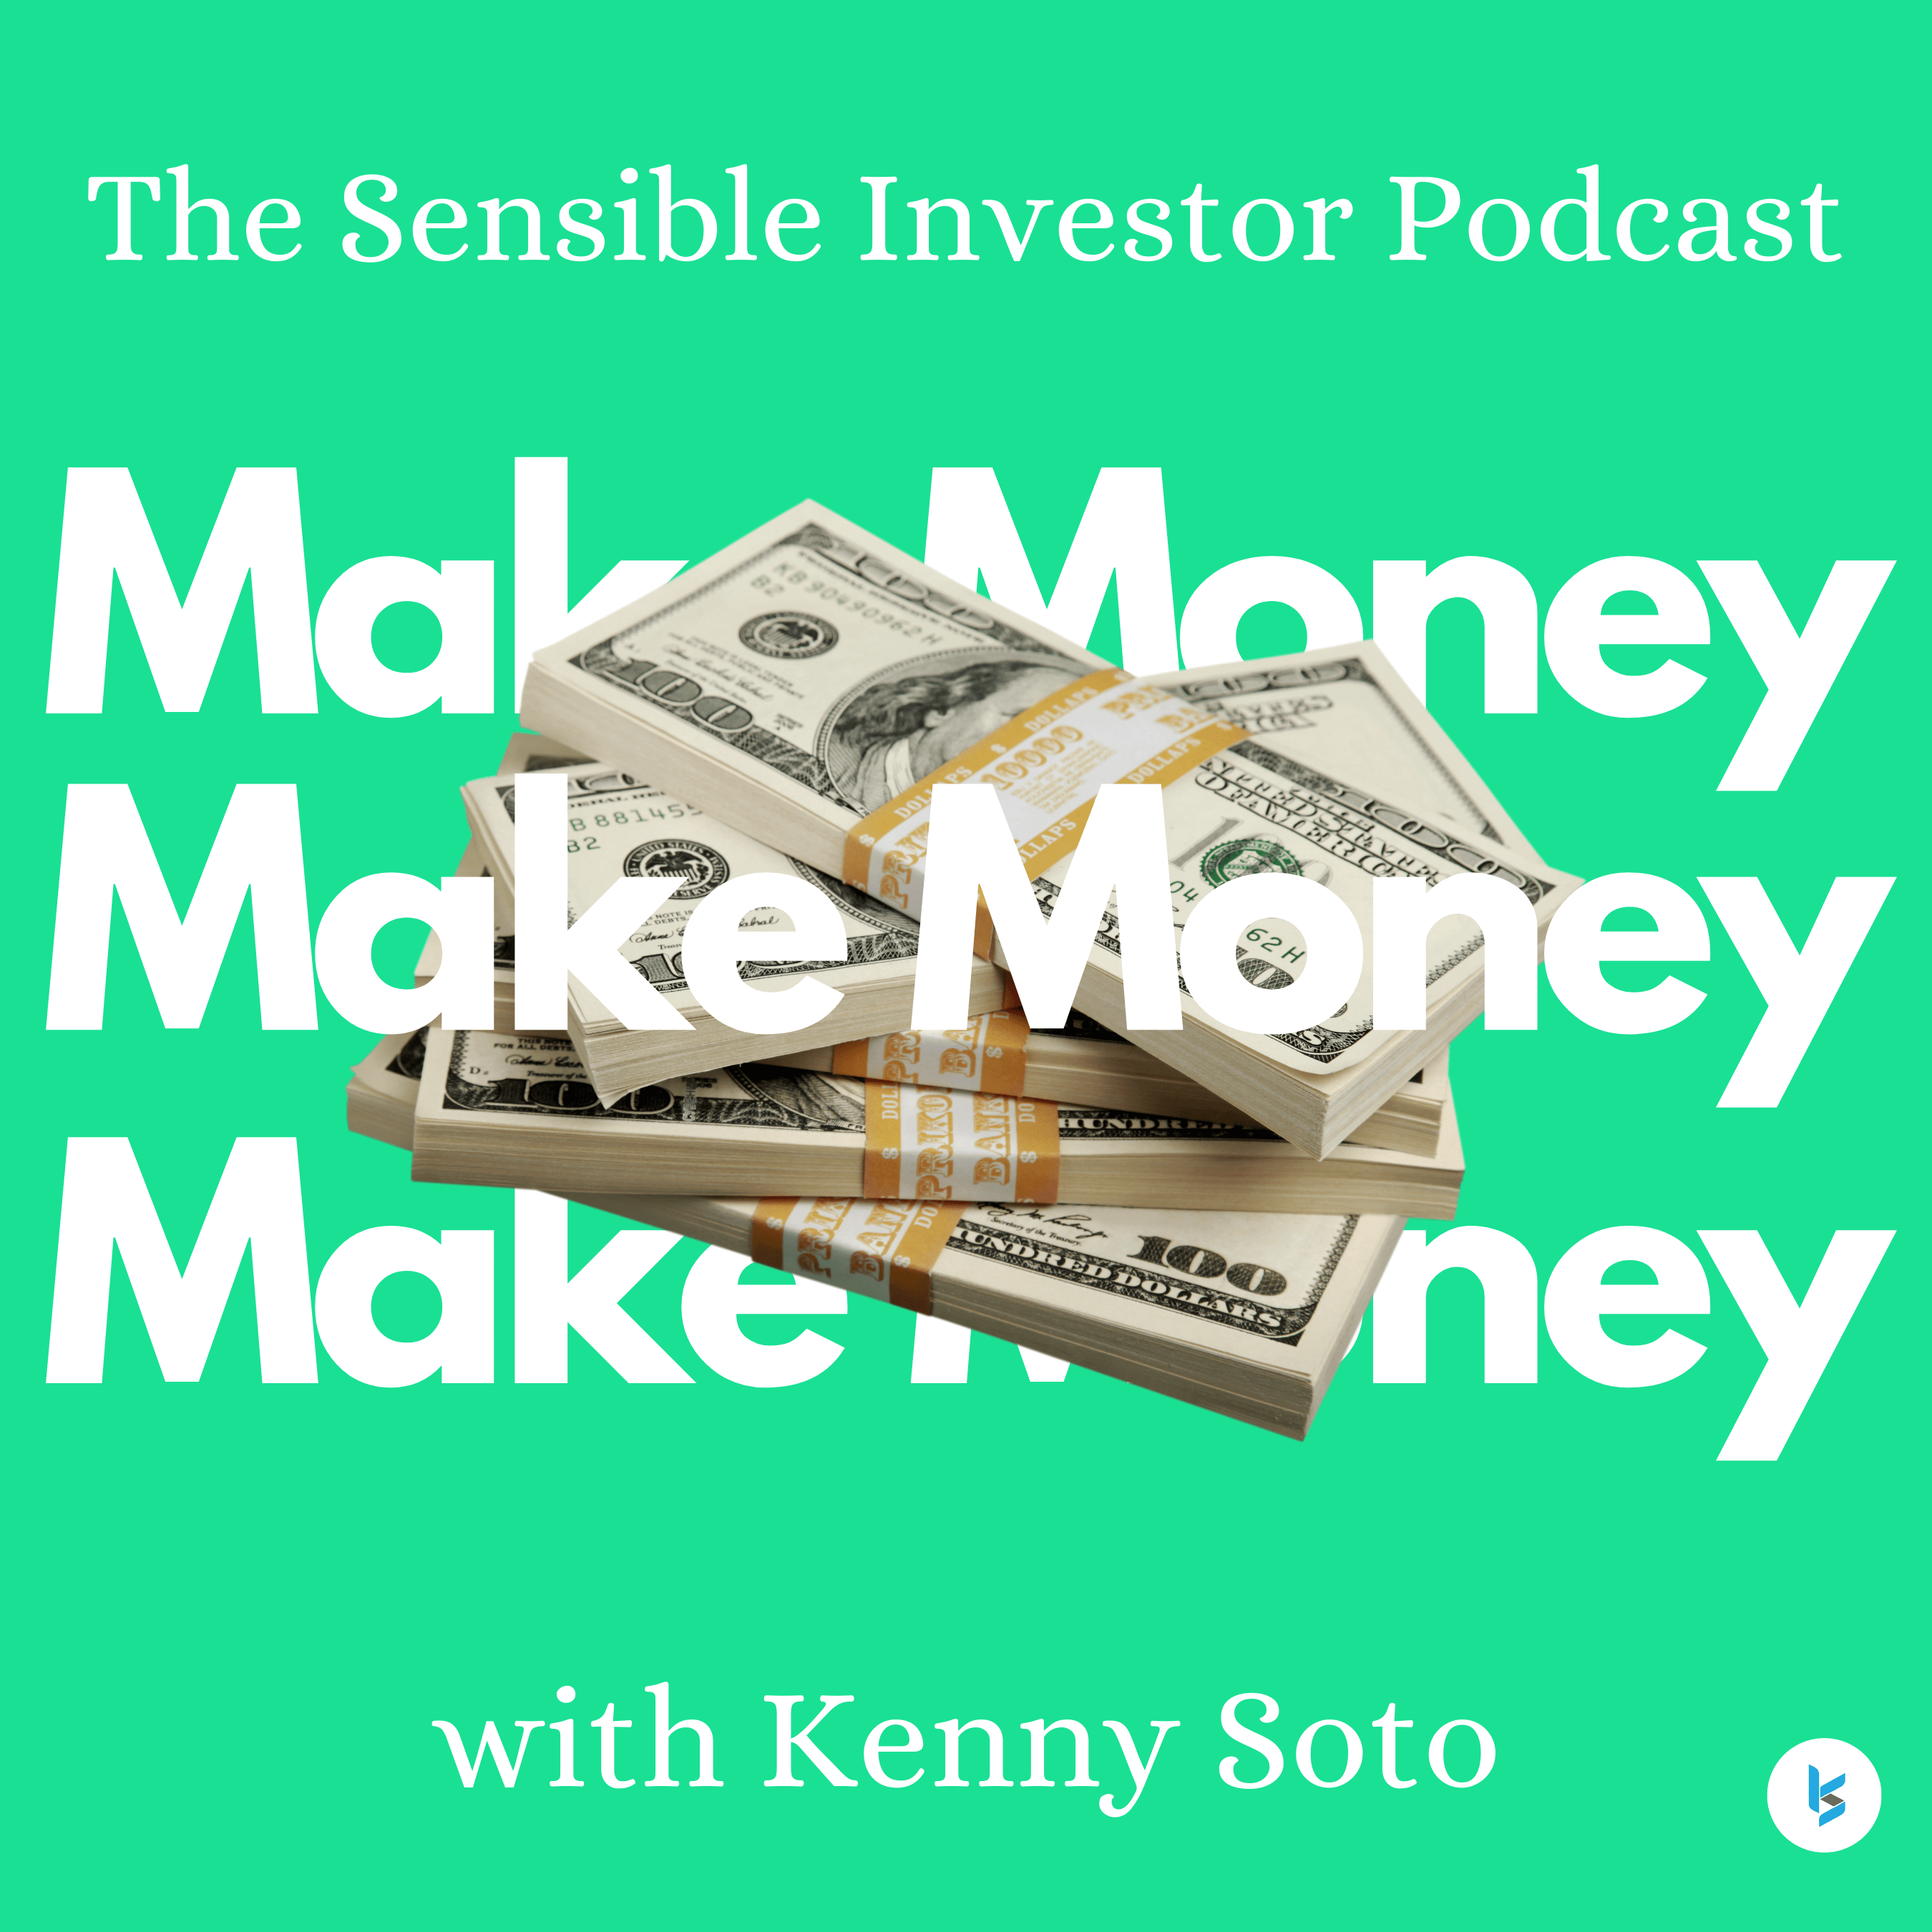 The Sensible Investor Podcast Hosted by Kenny Soto